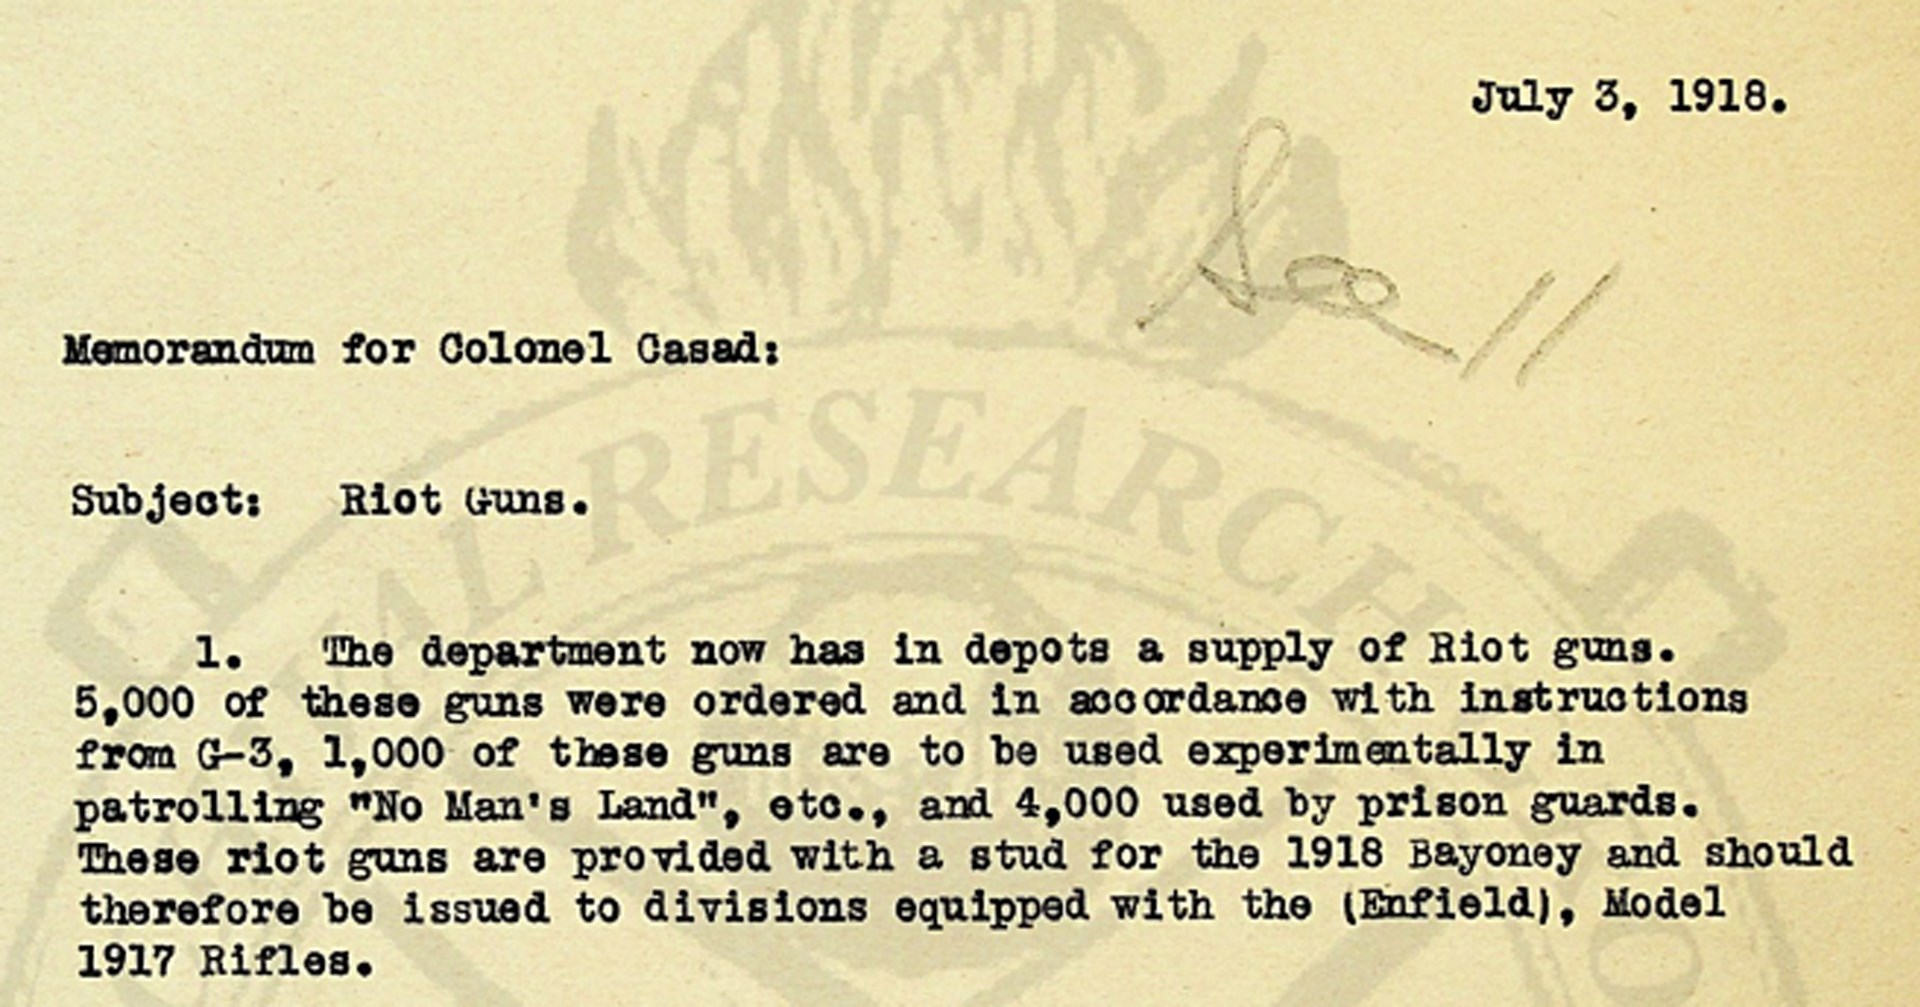 Of the initial 5,000 riot shotguns with bayonet adapters templated for use in the AEF, 80% were for use in guarding prisoners while the remaining 20% were destined for combat field trials. When this memo was written, the first shotguns were being issued to divisions for those tests. Document courtesy of Archival Research Group.